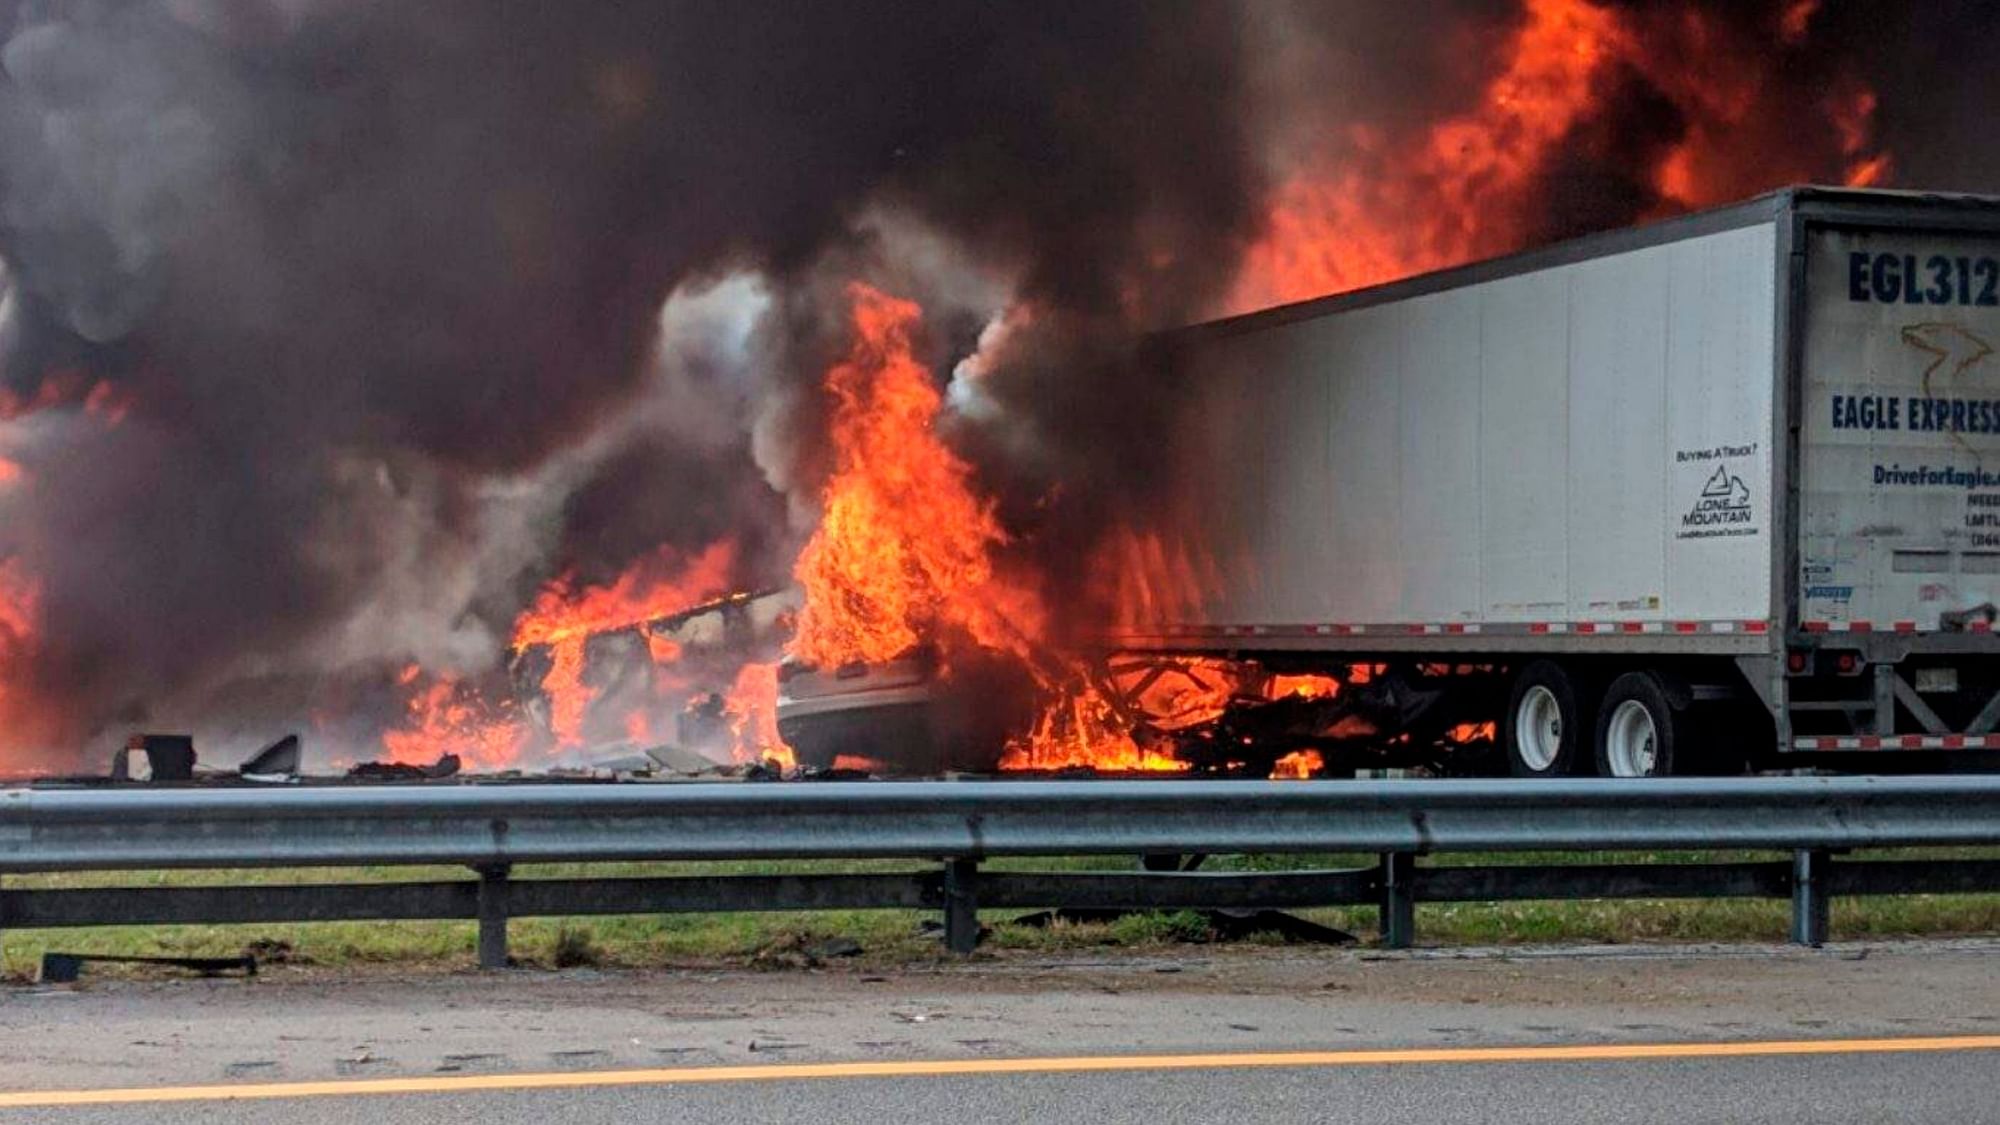 Flames engulf vehicles after a fiery crash along Interstate 75 in Florida on Thursday, 3 January.